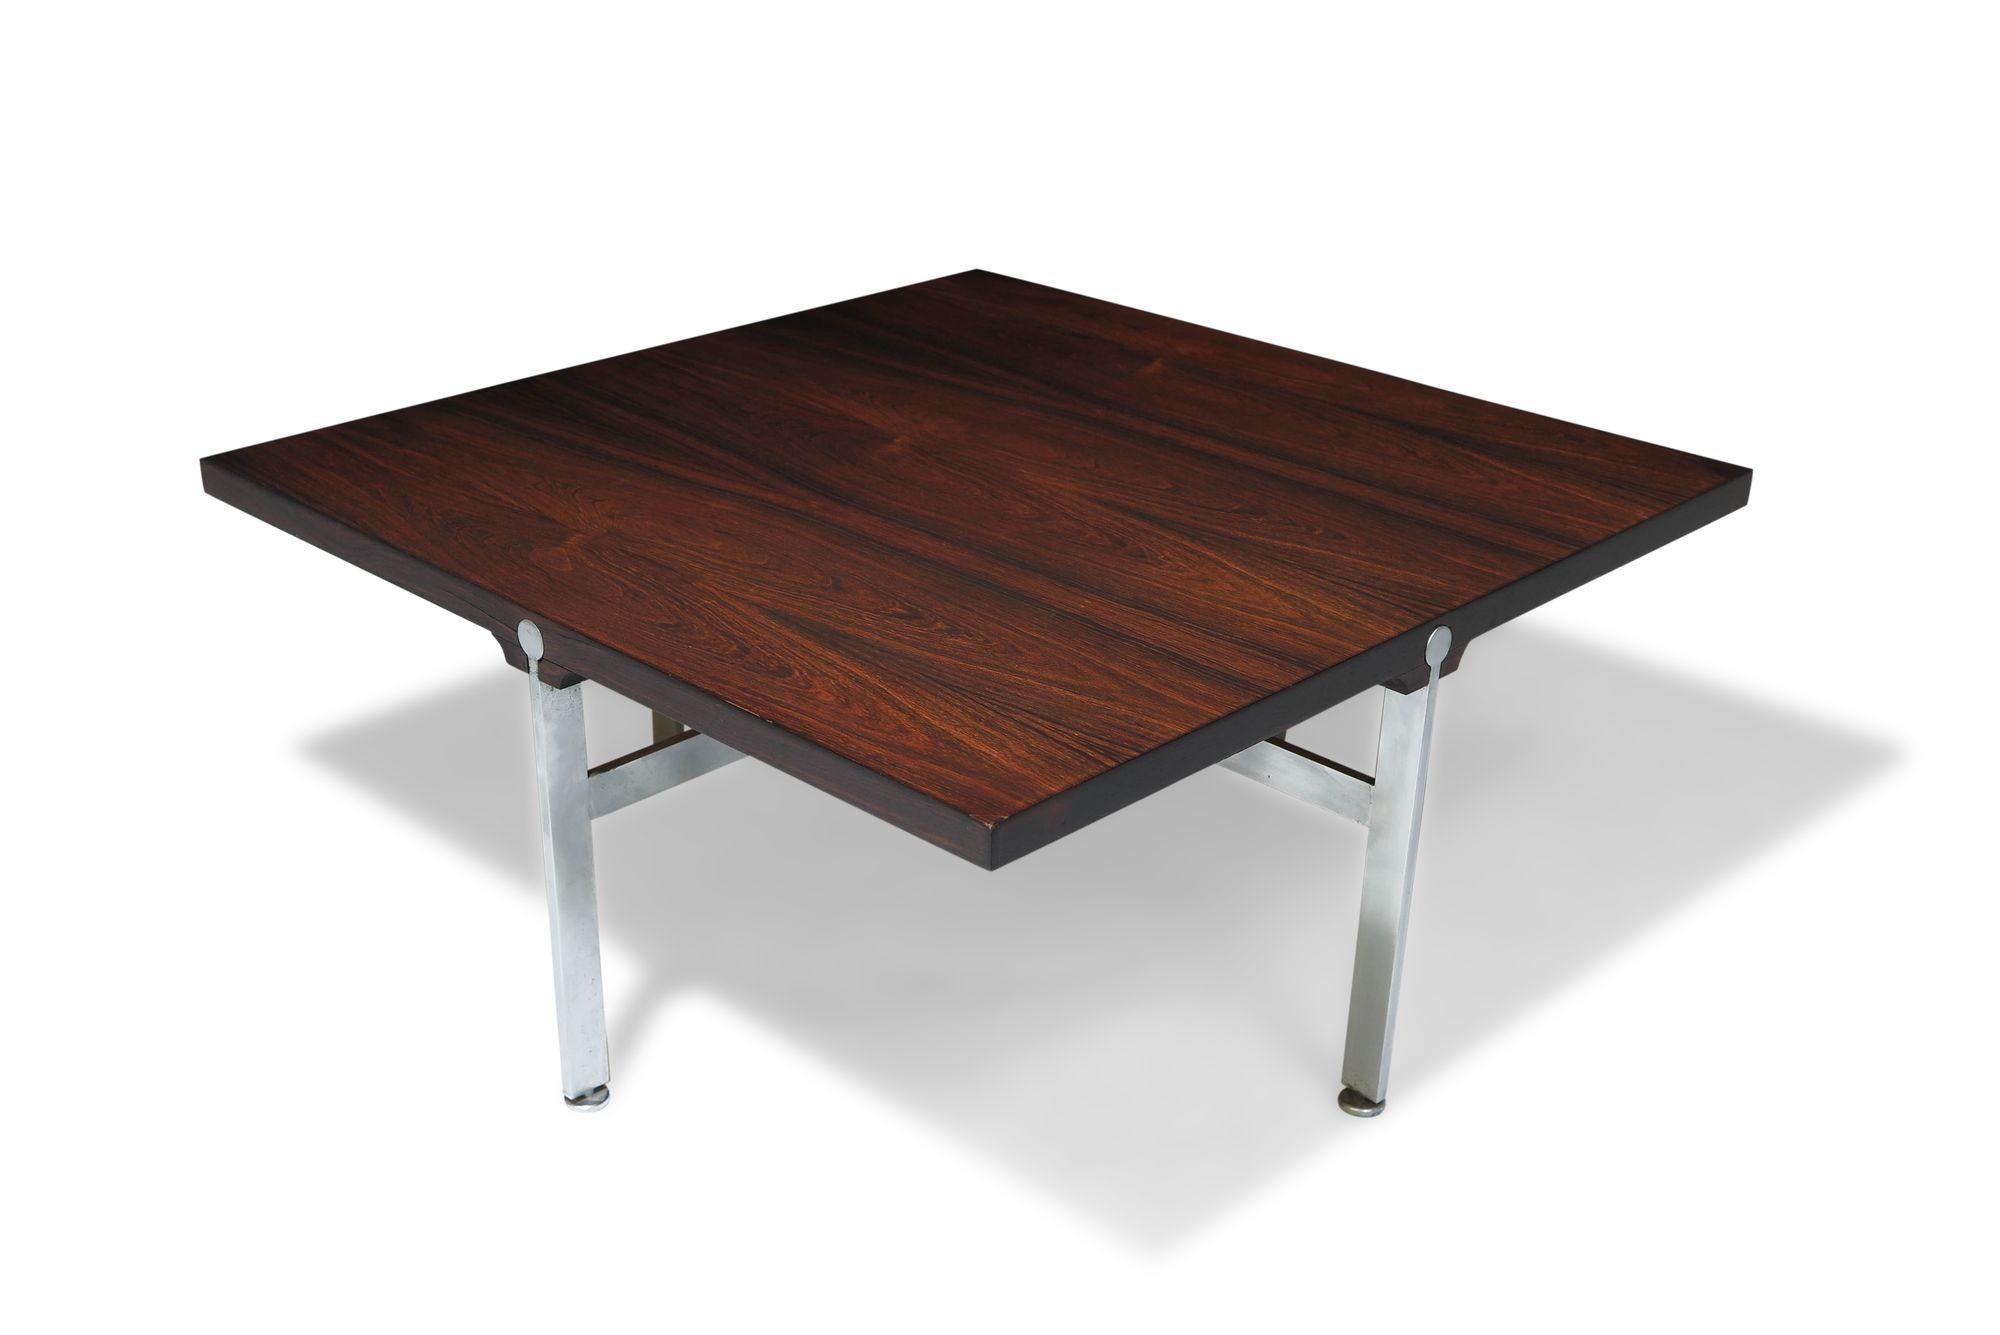 Square Rosewood coffee table designed by Illum Wikkelso for Soren Willadsen Mobelfabrik, 1960, Denmark. The coffee table is crafted of Brazilian rosewood and raised on steel legs. 
Measurements W 29.50'' x D 29.50'' x H 13.75''.